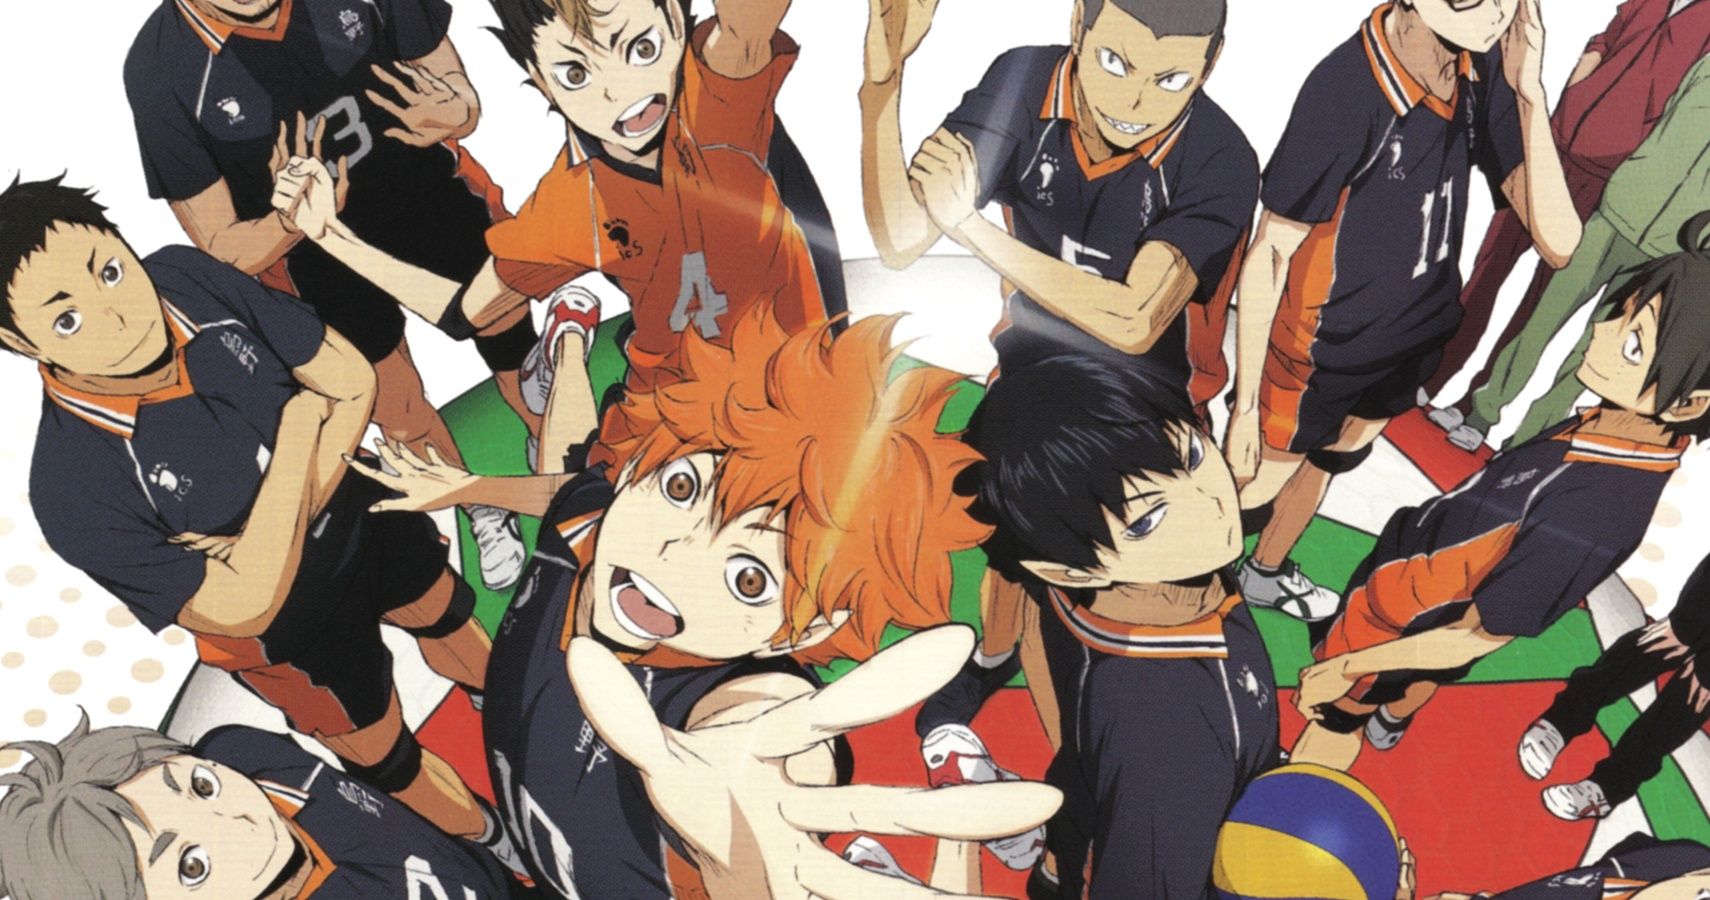 Haikyuu!!: 10 Most Underrated Characters | CBR